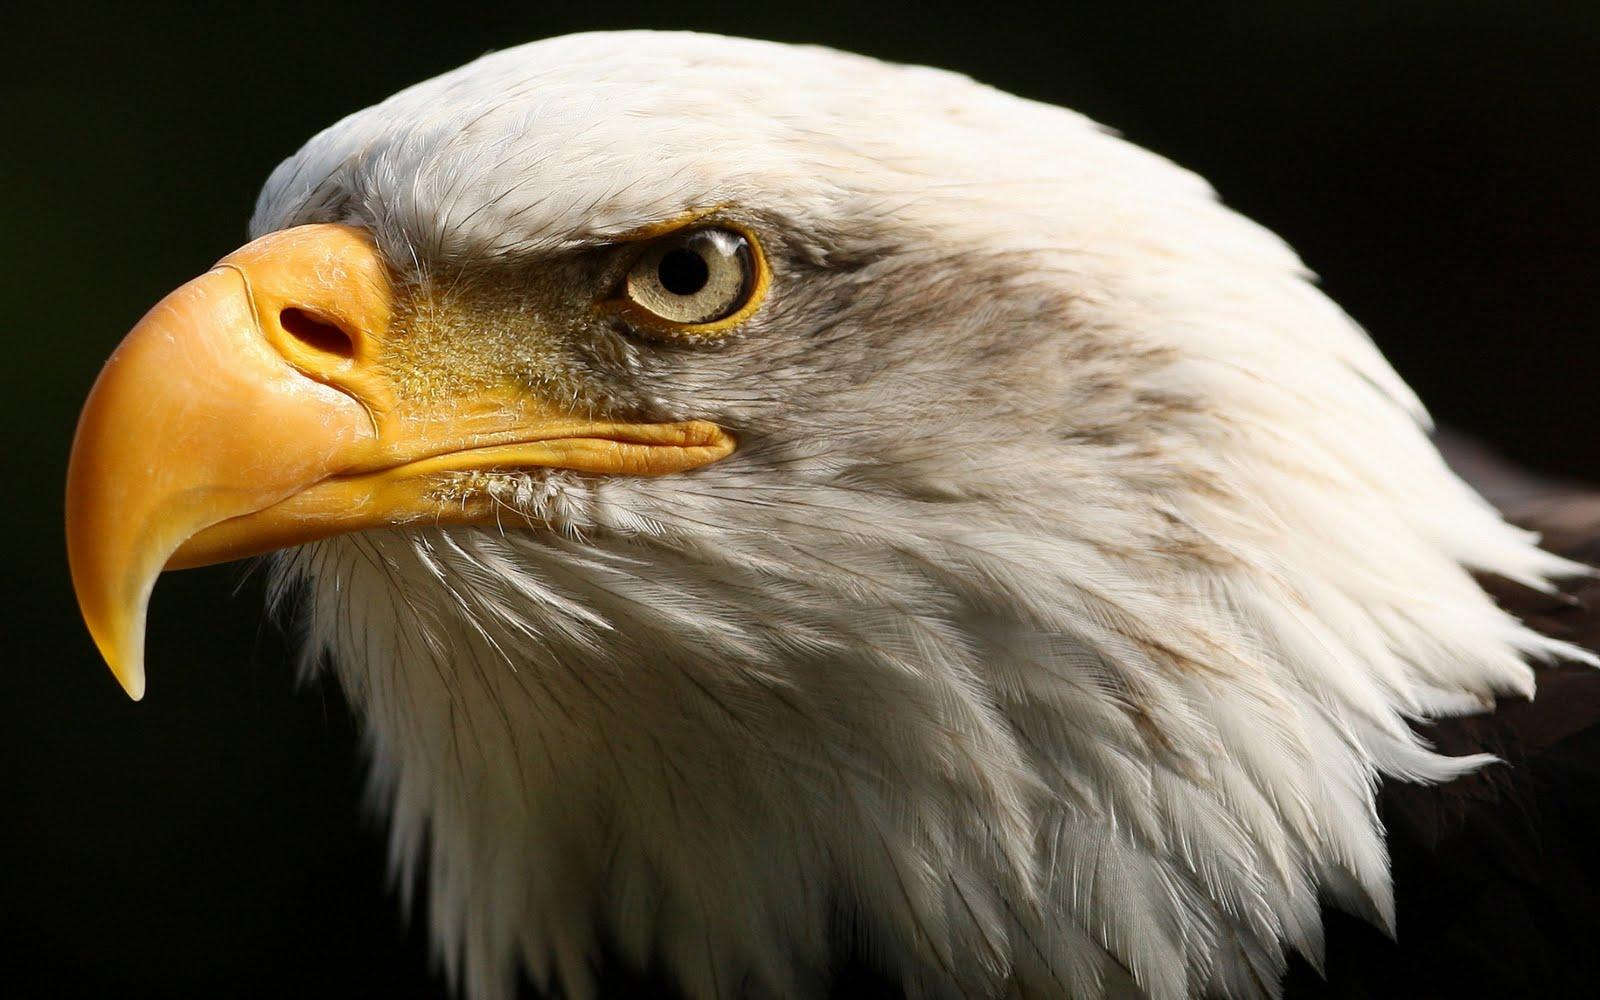 Eagle HD Wallpaper. Eagle New image and Picture